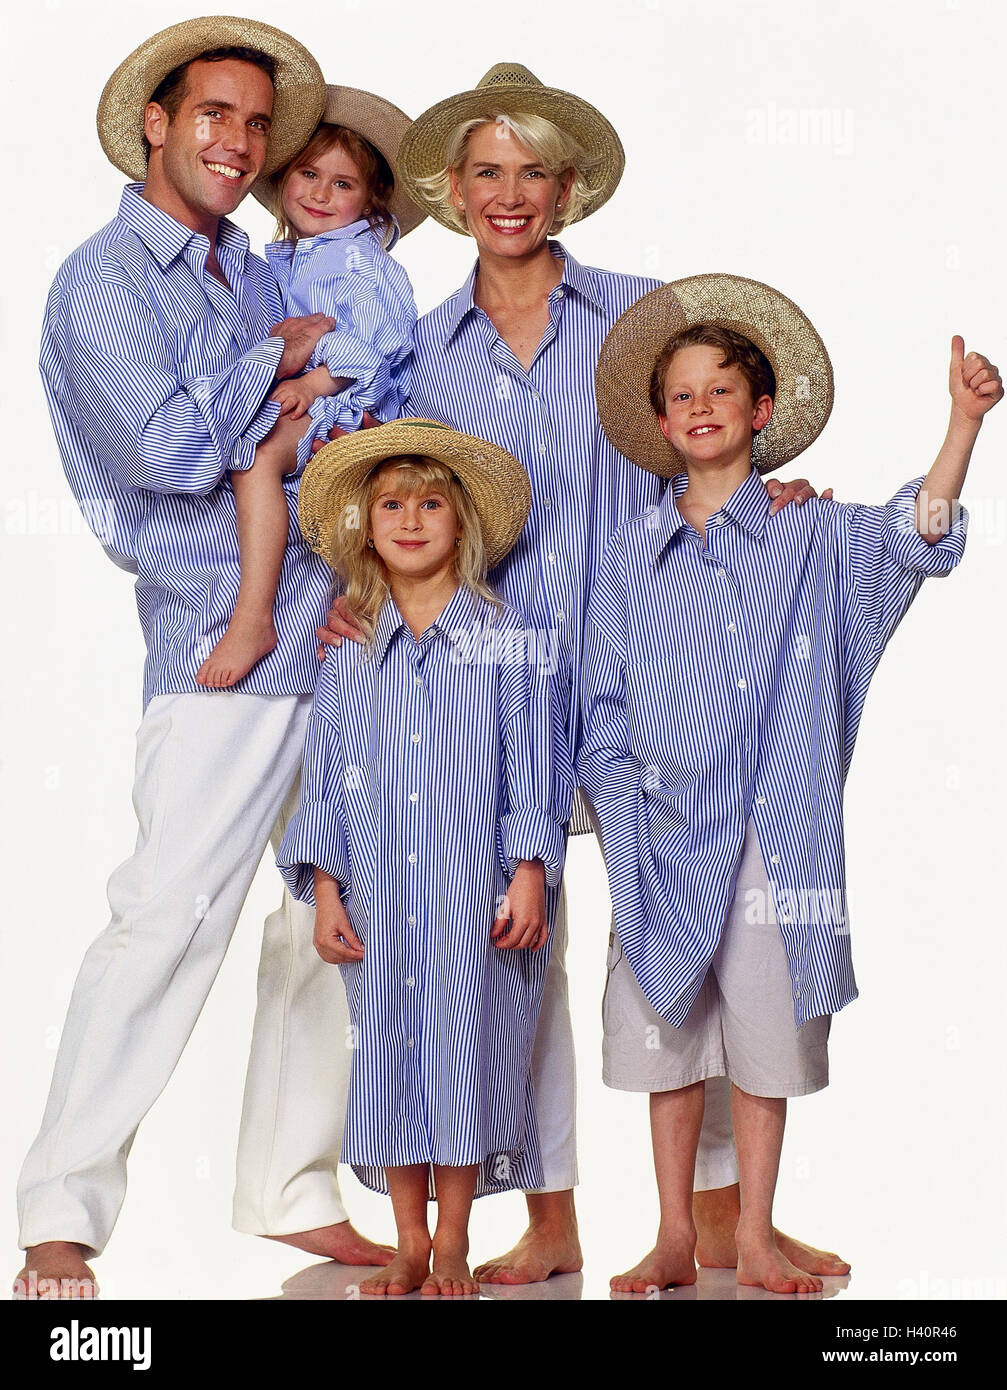 Family, clothes, 'partner's look', straw hats, shirts, white-blue, touched, group picture Families, man, woman, parents, children, boy, son, gesture, pollex, high, girls, subsidiary, subsidiaries, two, unit clothes, care, hats, shirt, shirts, films, stand Stock Photo